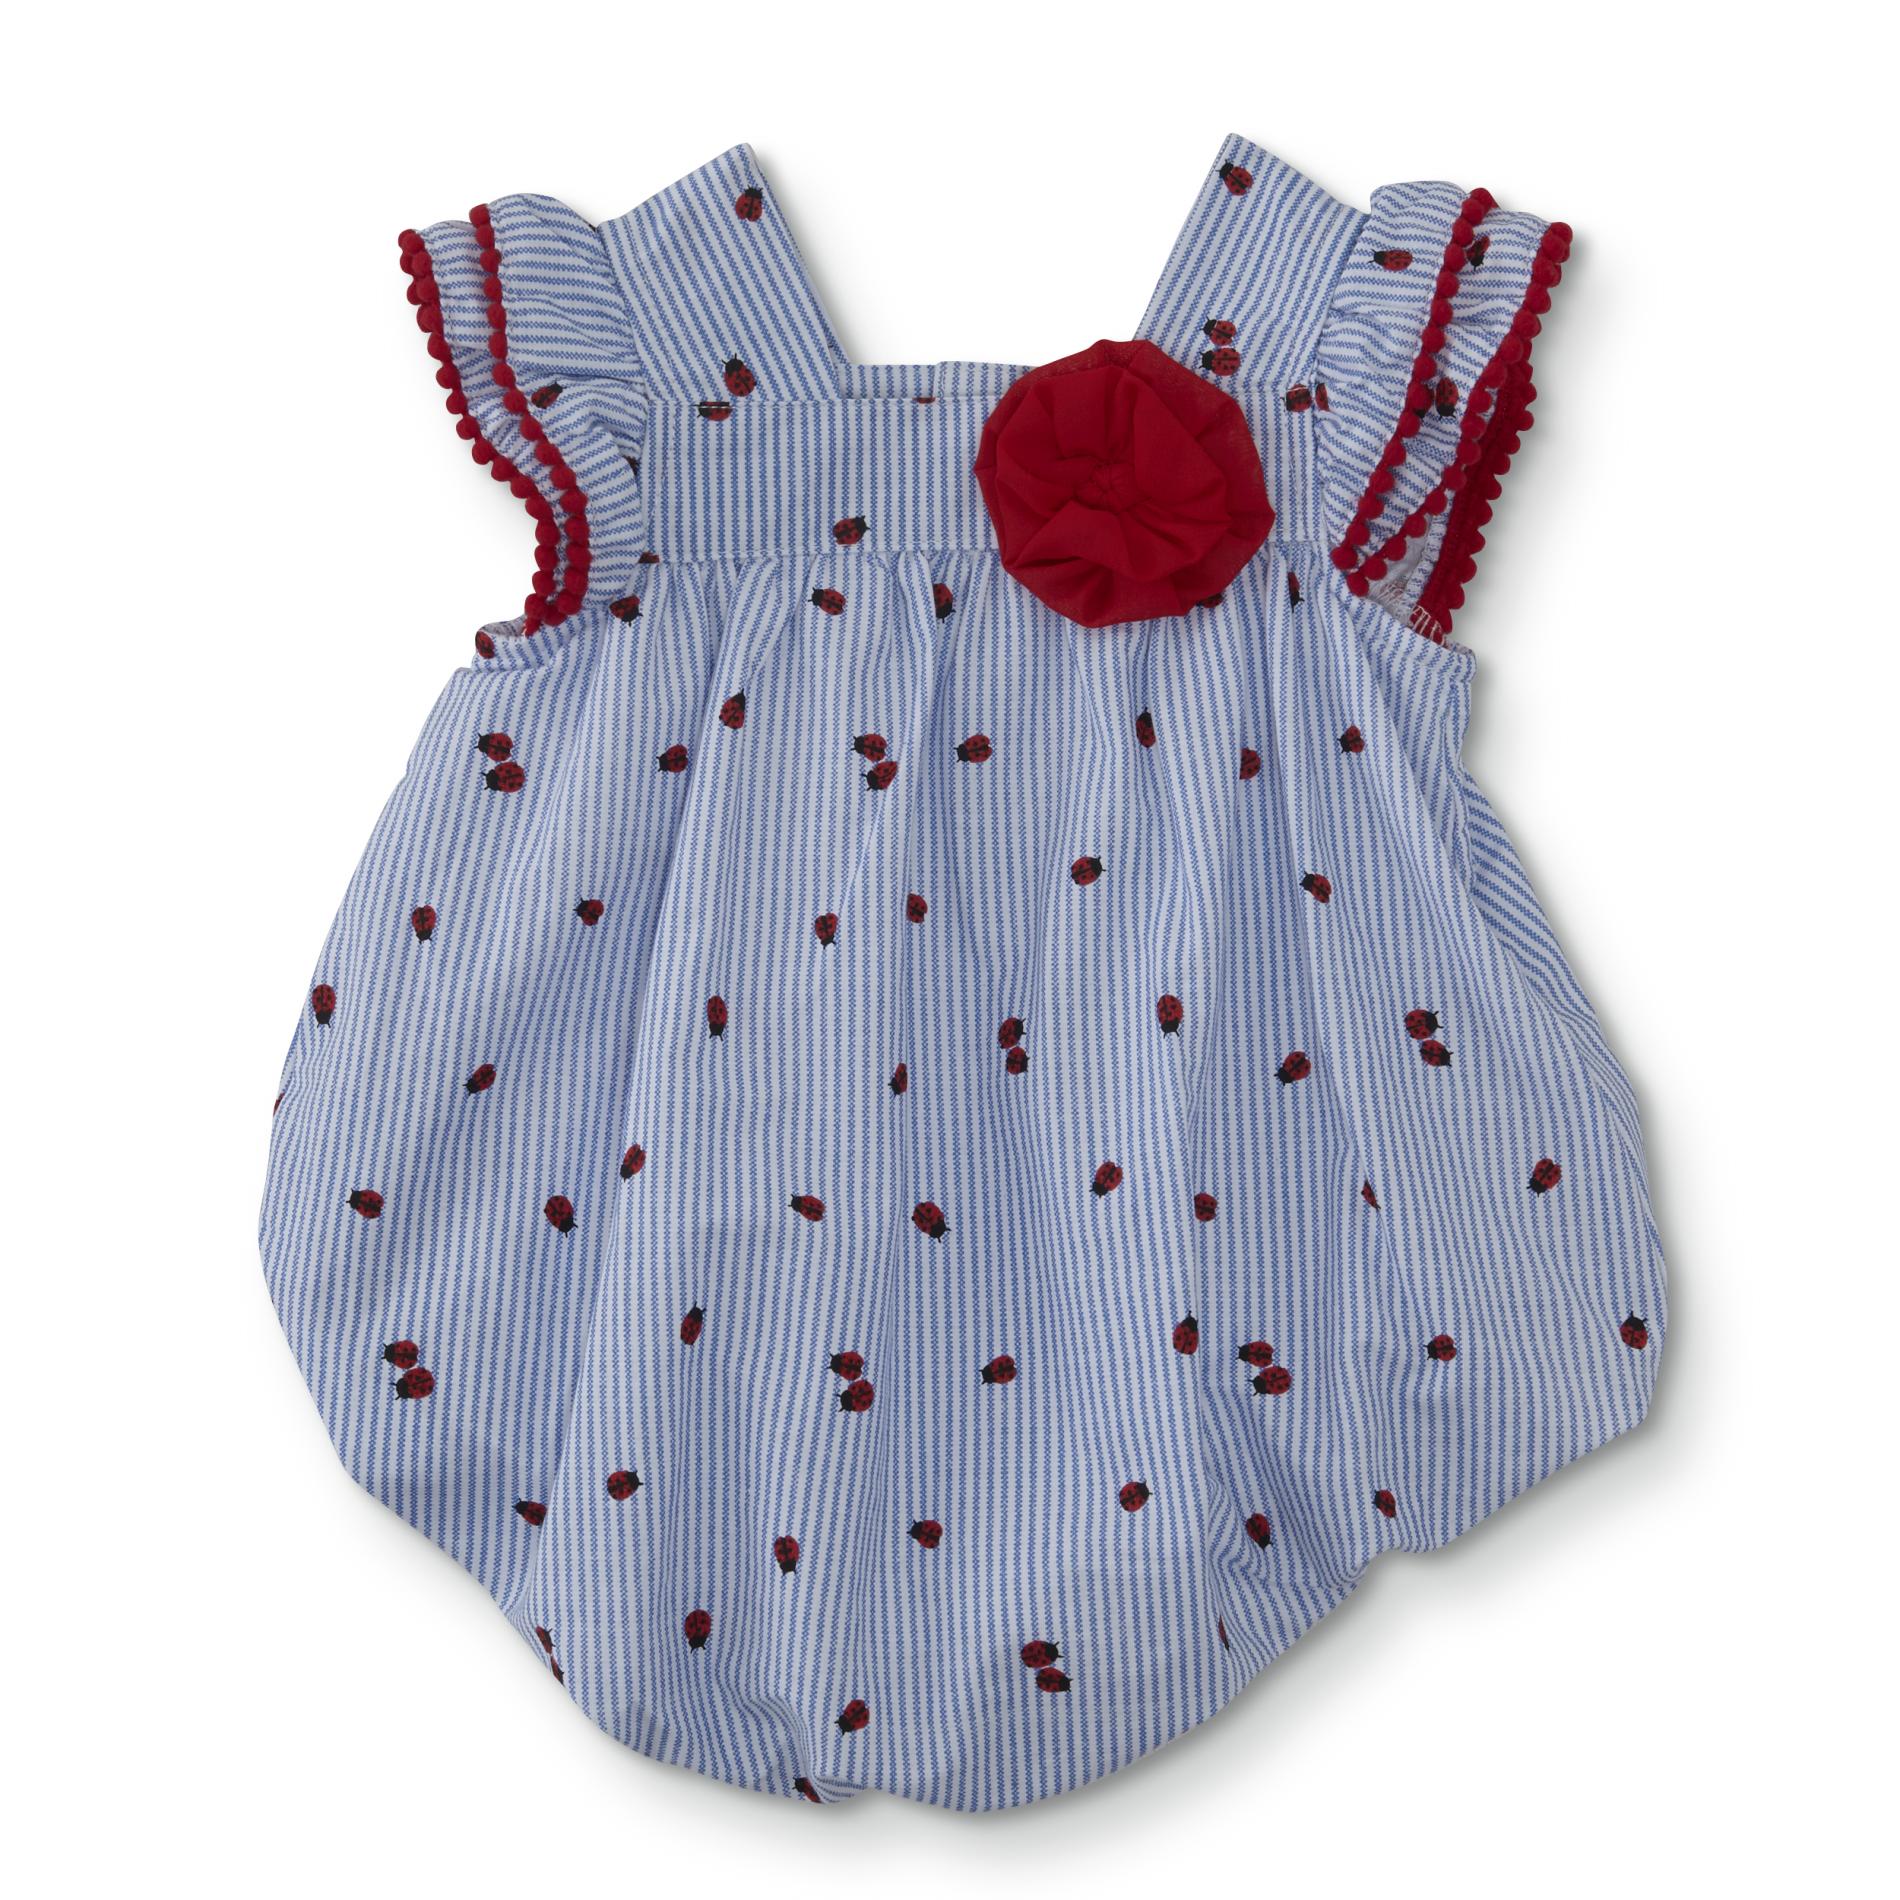 Baby Essentials Infant Girls' Bubble Romper - Striped/Ladybug